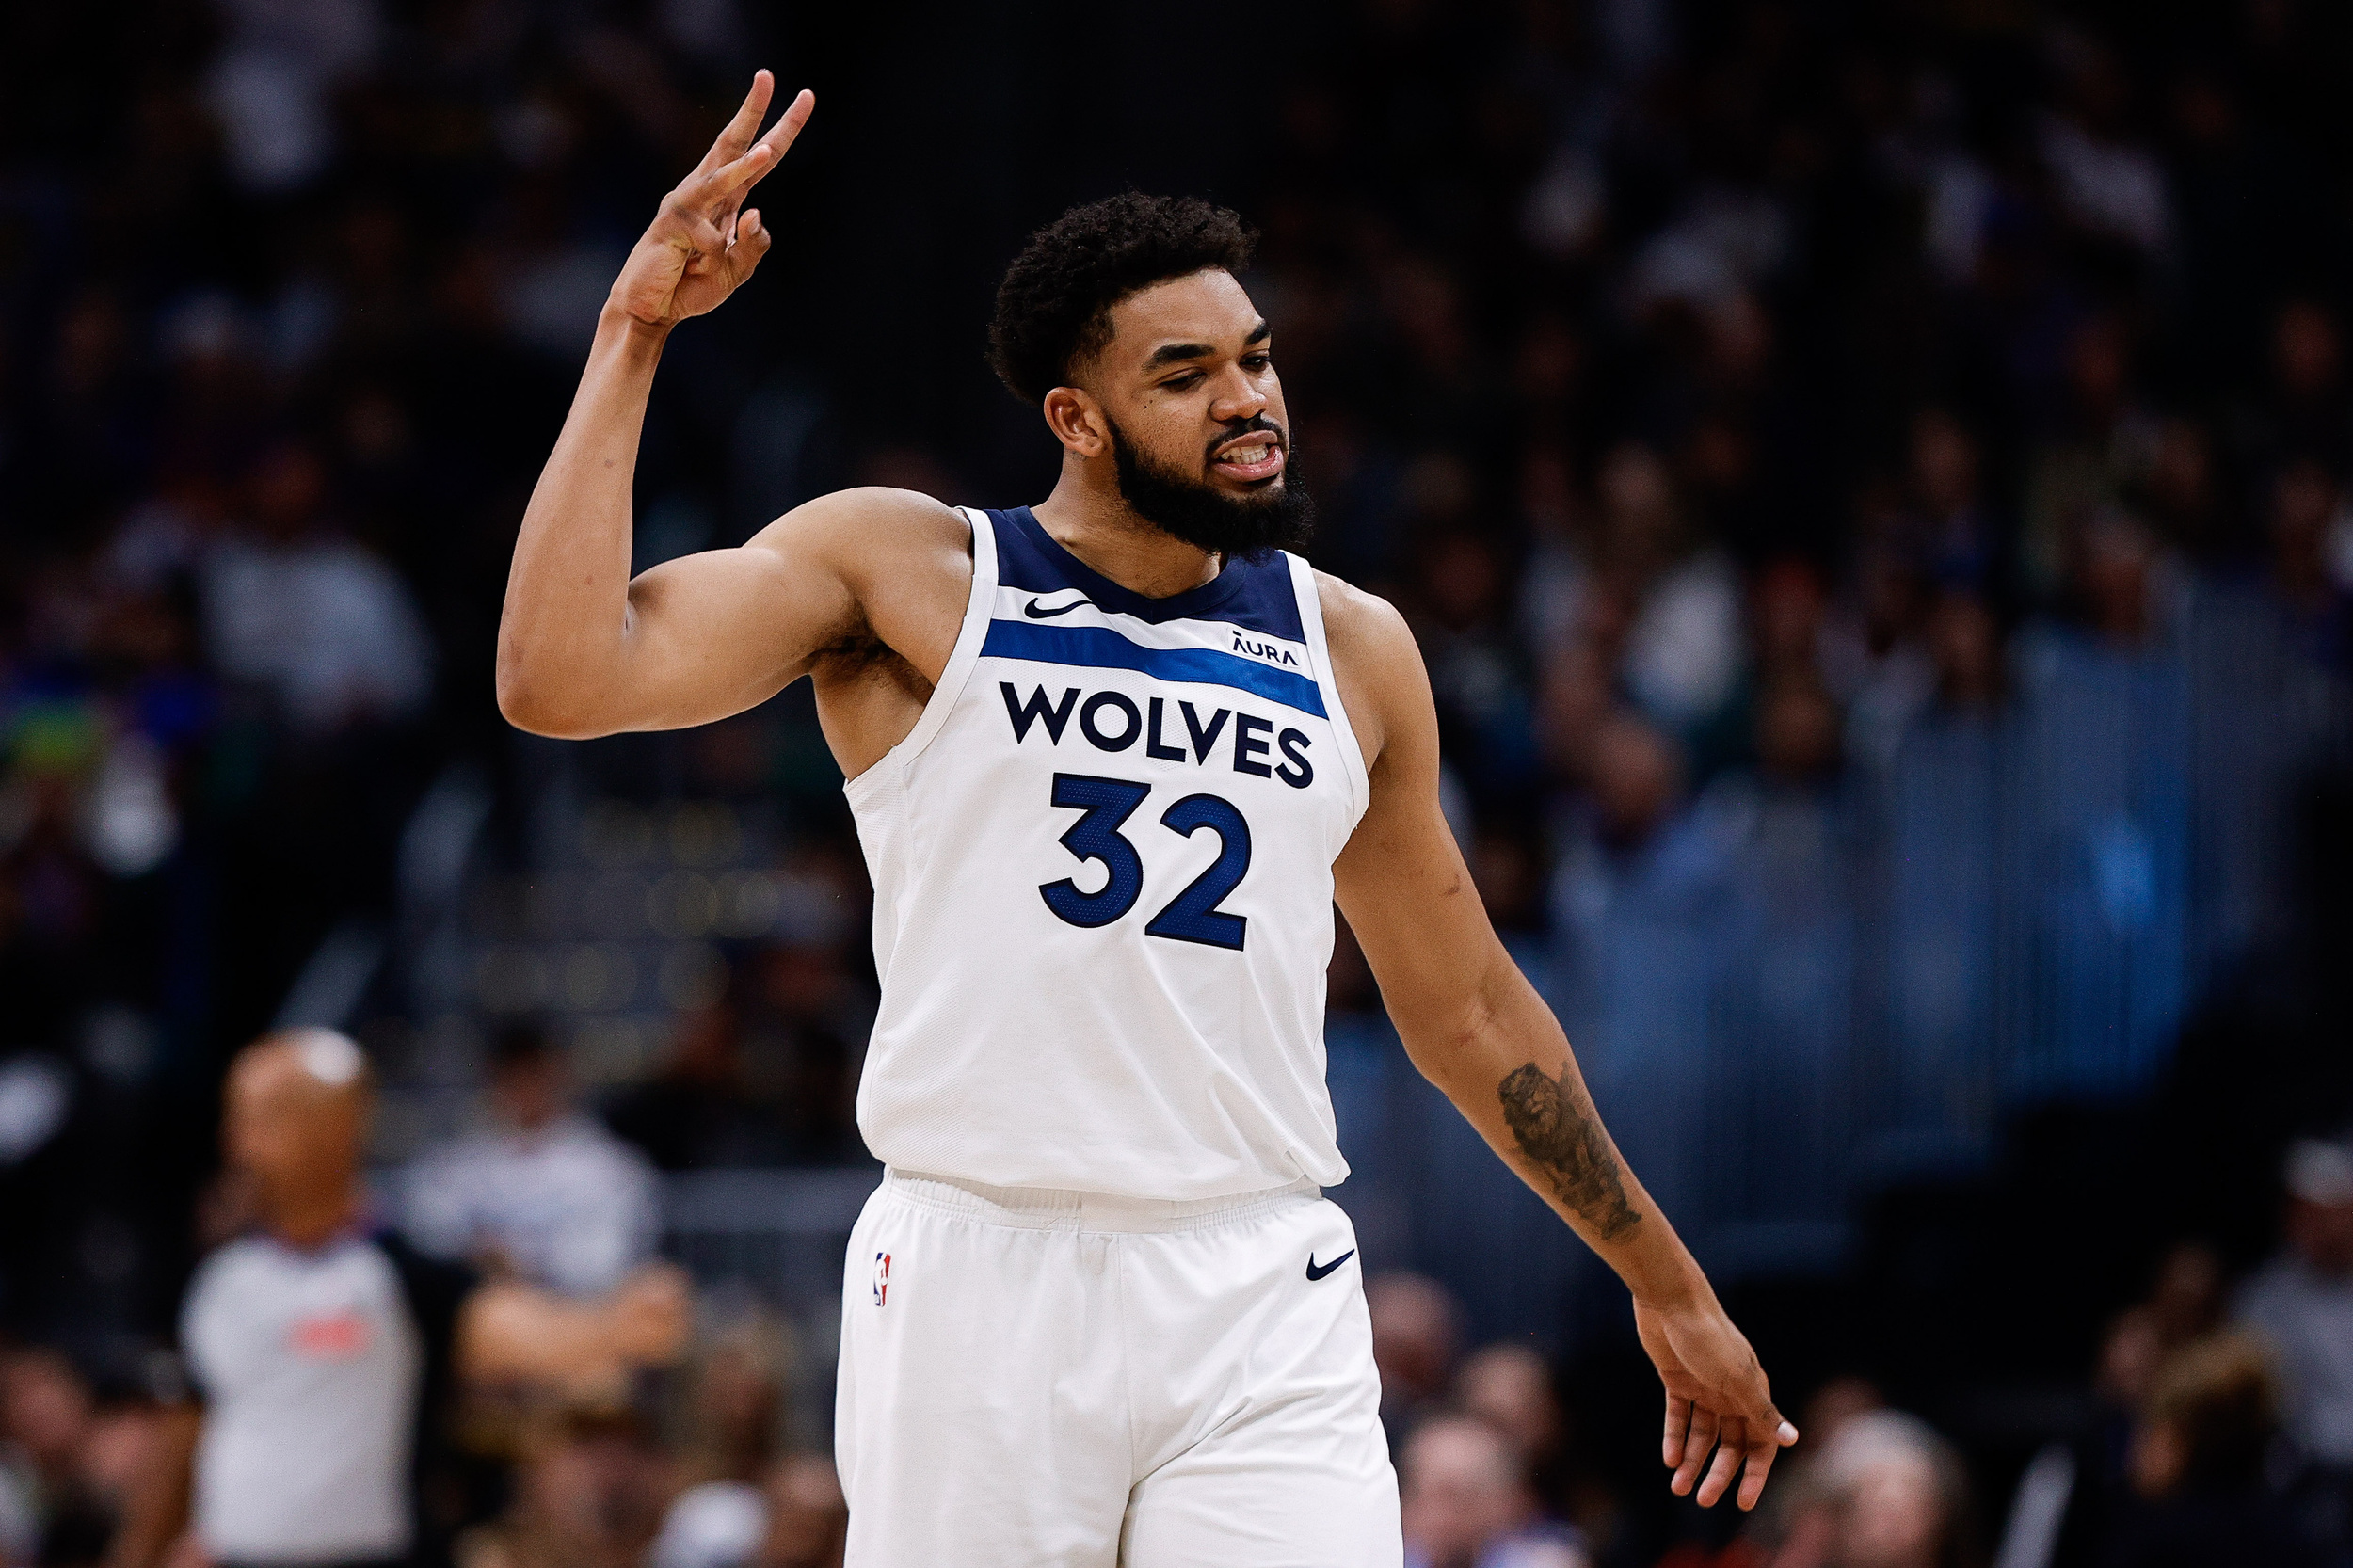 nuggets melt down under timberwolves' pressure to go down 0-2